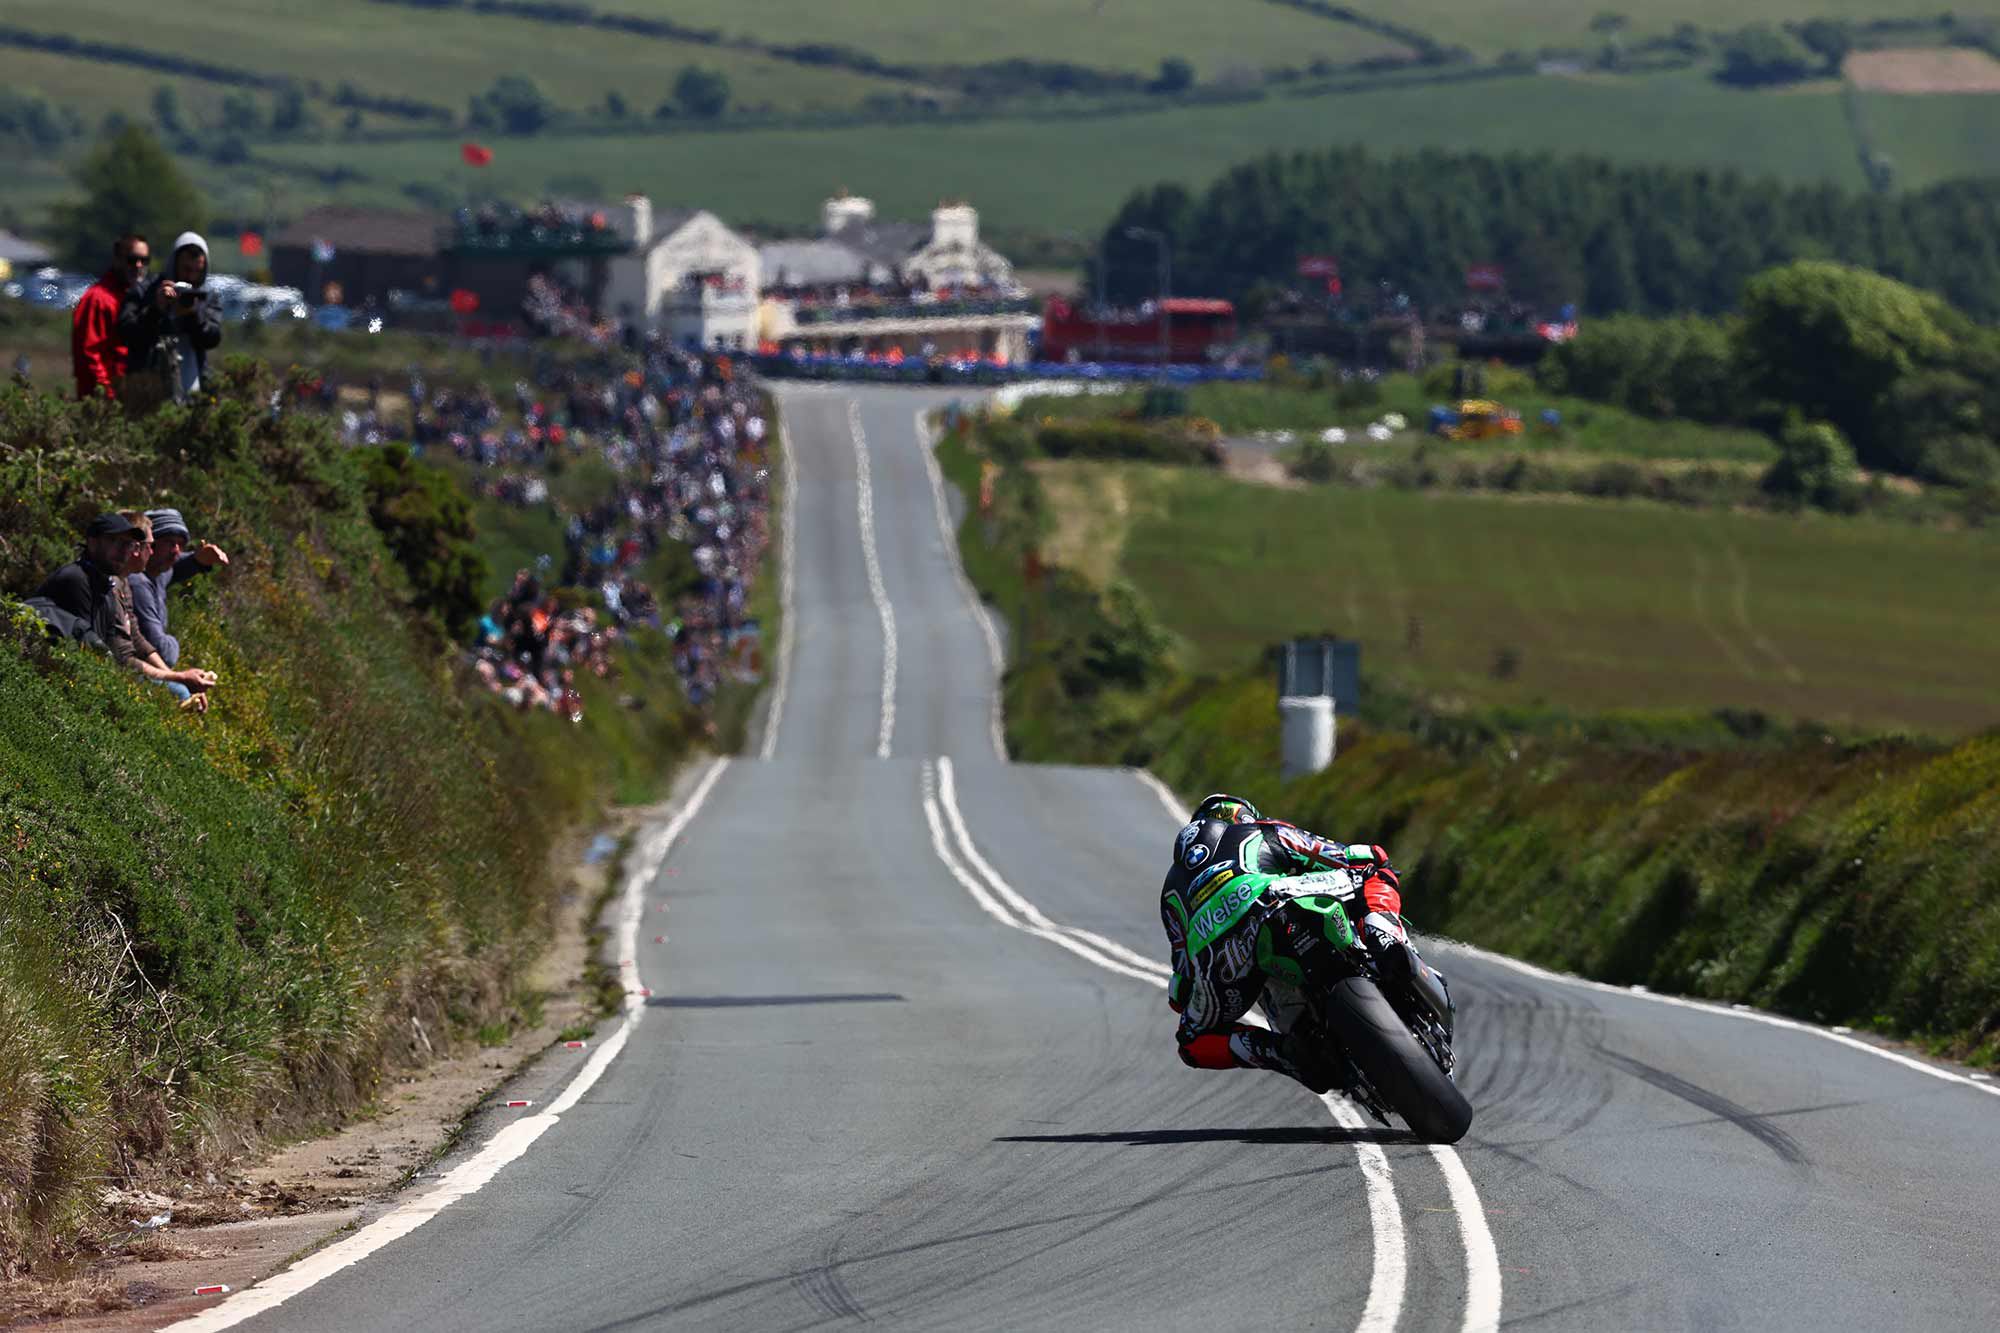 Peter Hickman makes a charge towards Creg-ny-Baa, around the 34th mile of the course.